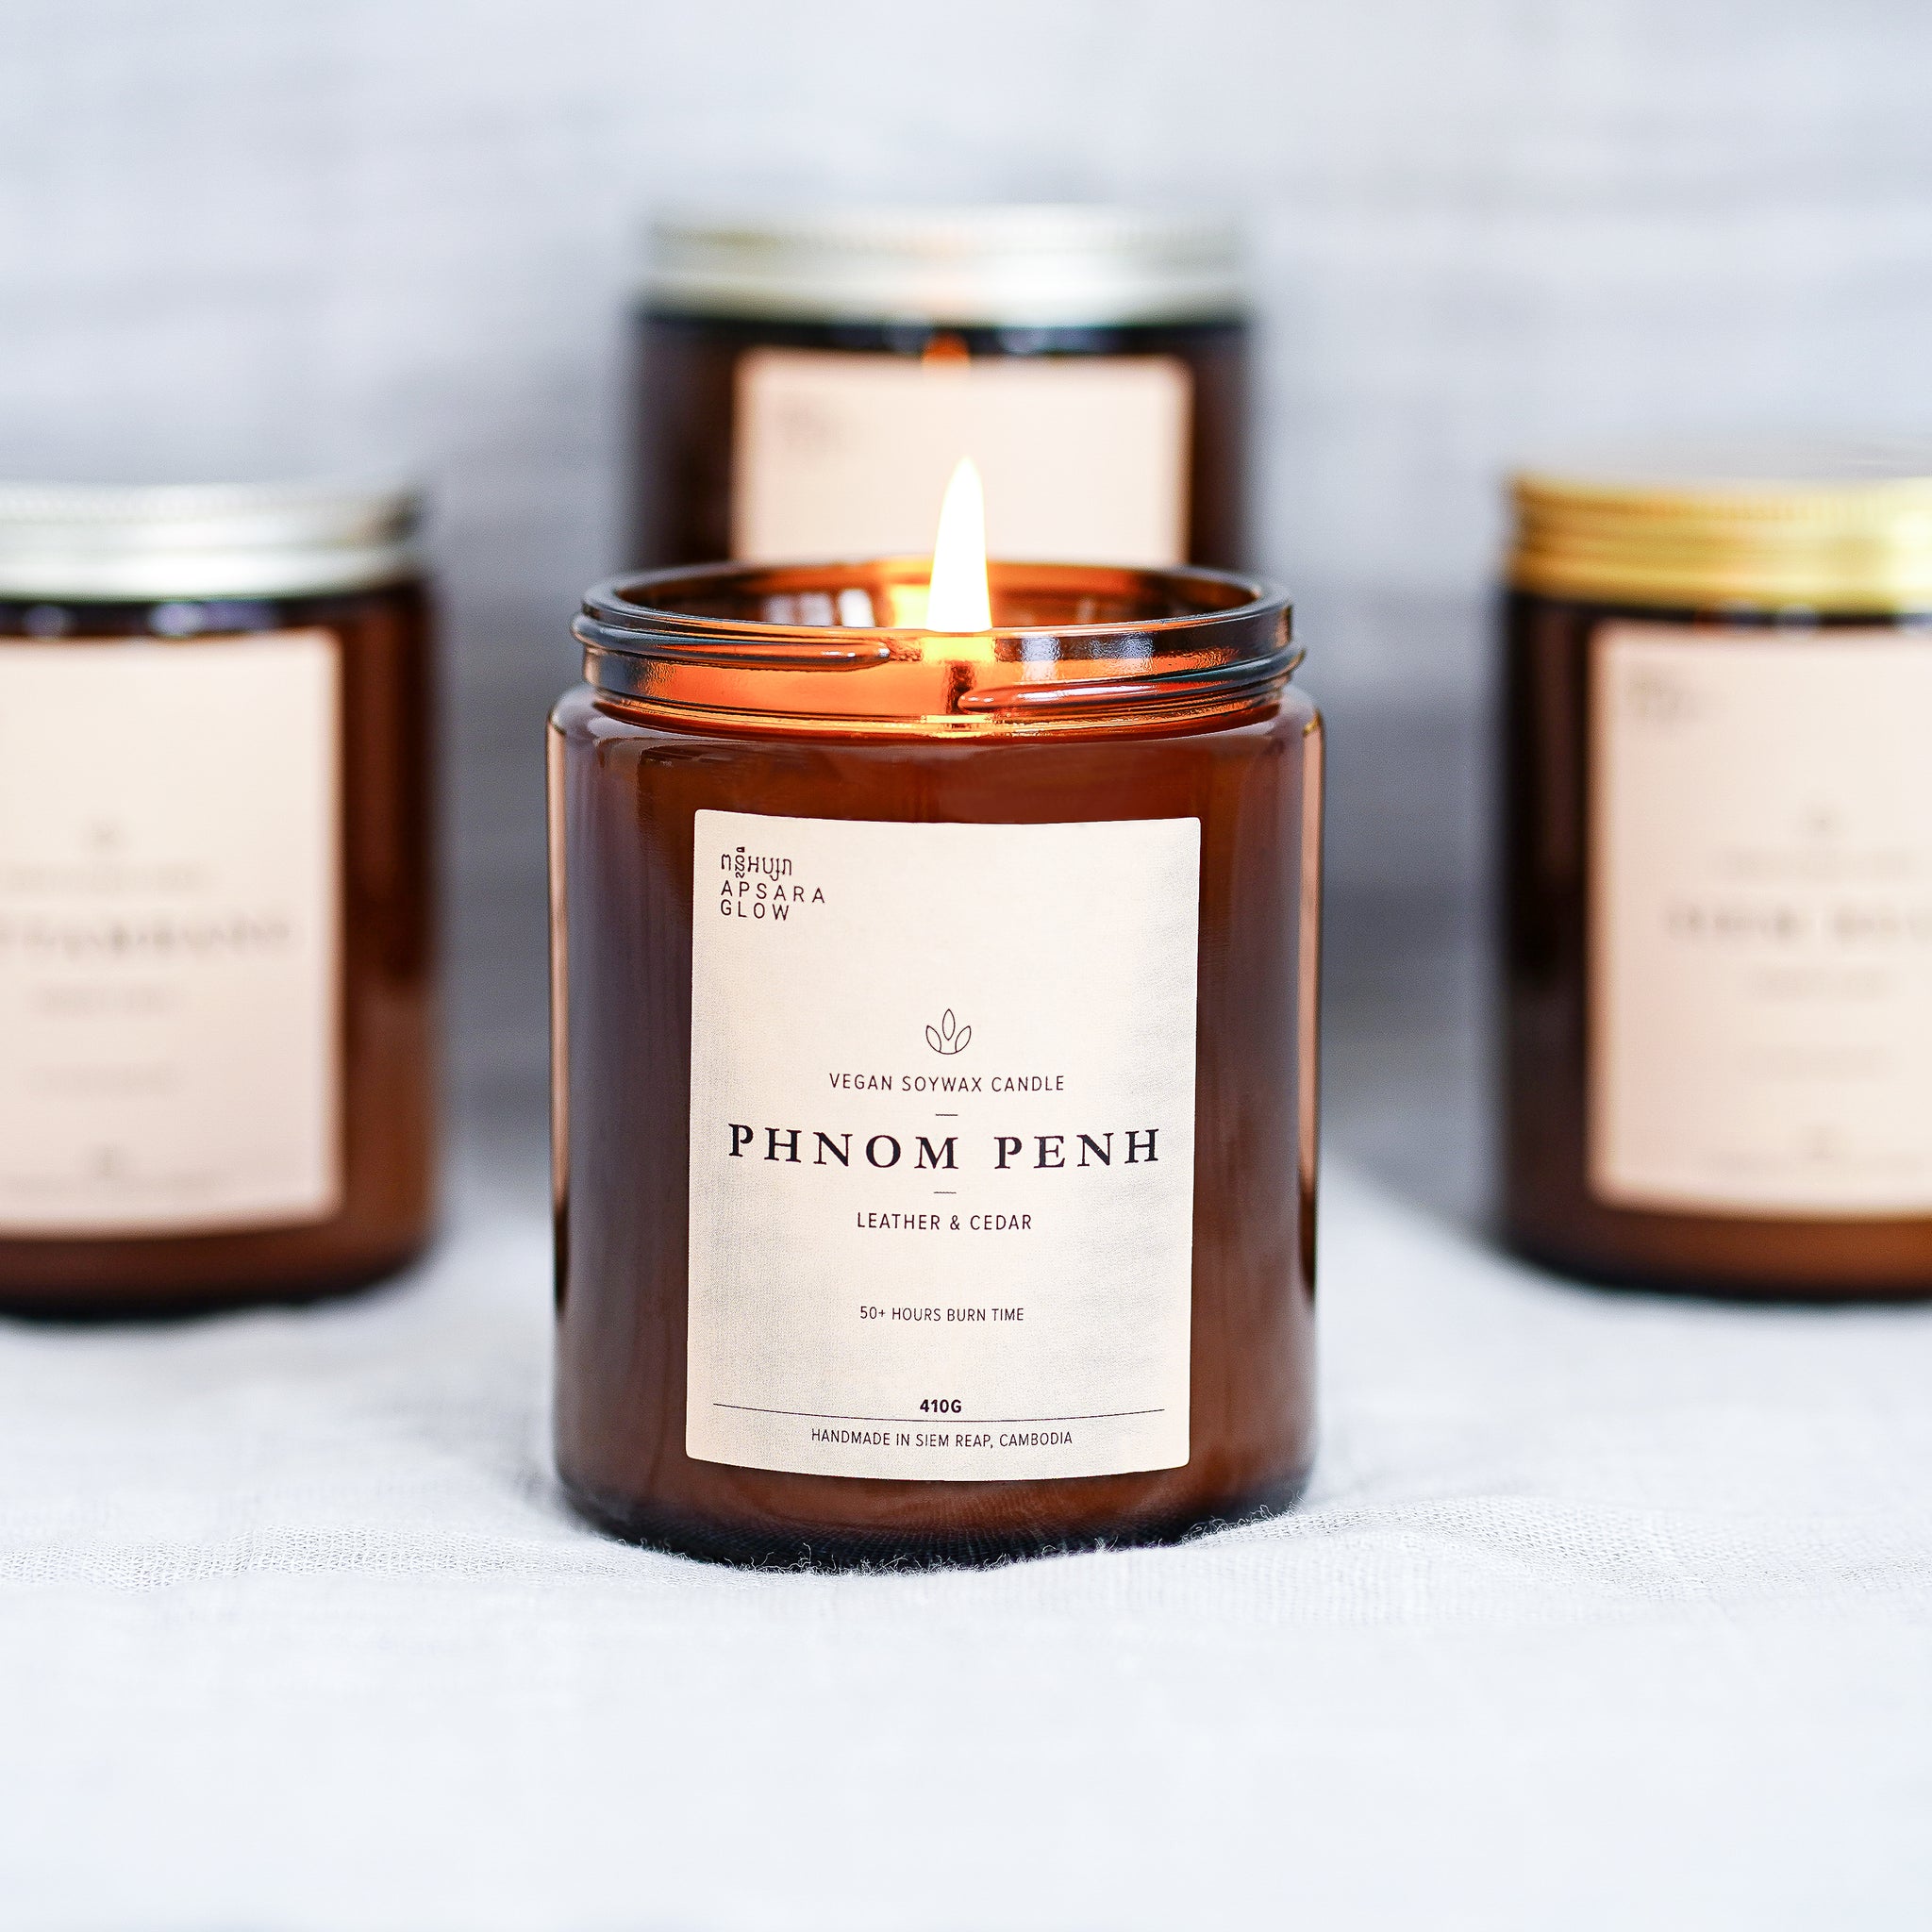 Fill your room with this woody candle. This natural, vegan soy wax candle features masculine scent of smoky leather with hints of fresh woody cedar. It is inspired by the capital of Cambodia, Phnom Penh, famously known for its bustling and robust movements.